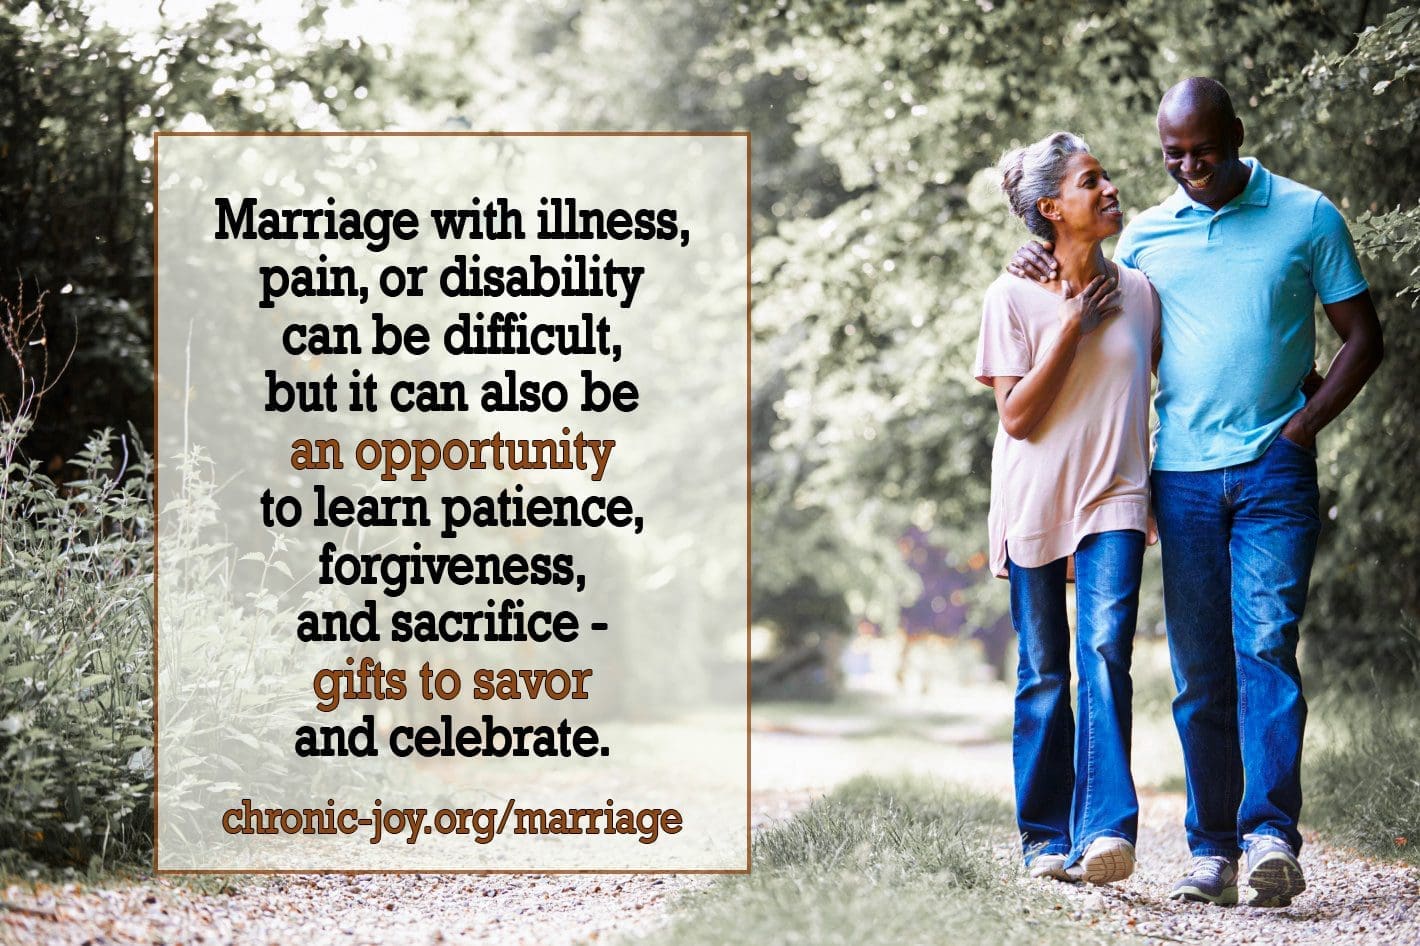 Marriage with illness, pain, or disability can be difficult, but it can also be an opportunity to learn patience, forgiveness, and sacrifice - gifts to savor and celebrate.